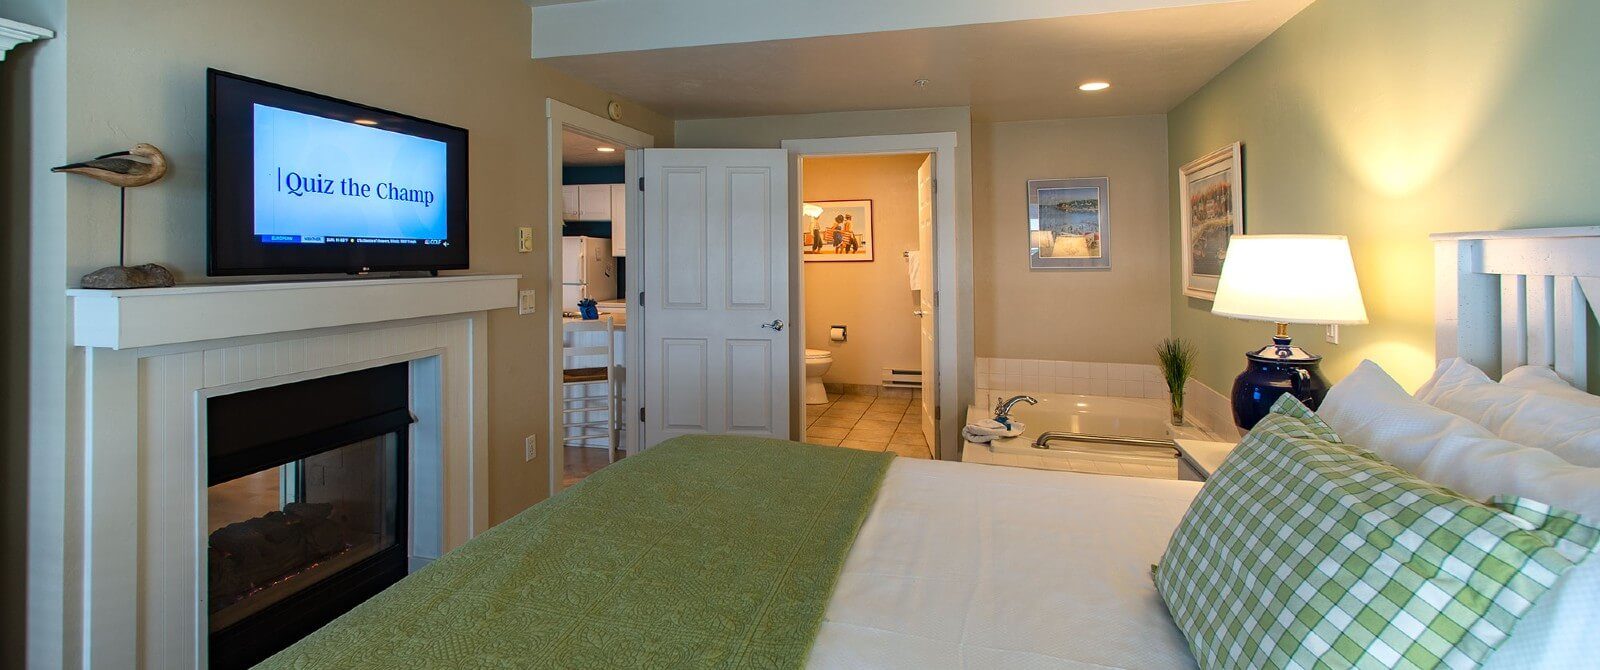 Spacious bedroom in hues of green and white, bed in front of two-sided gas fireplace, corner jacuzzi